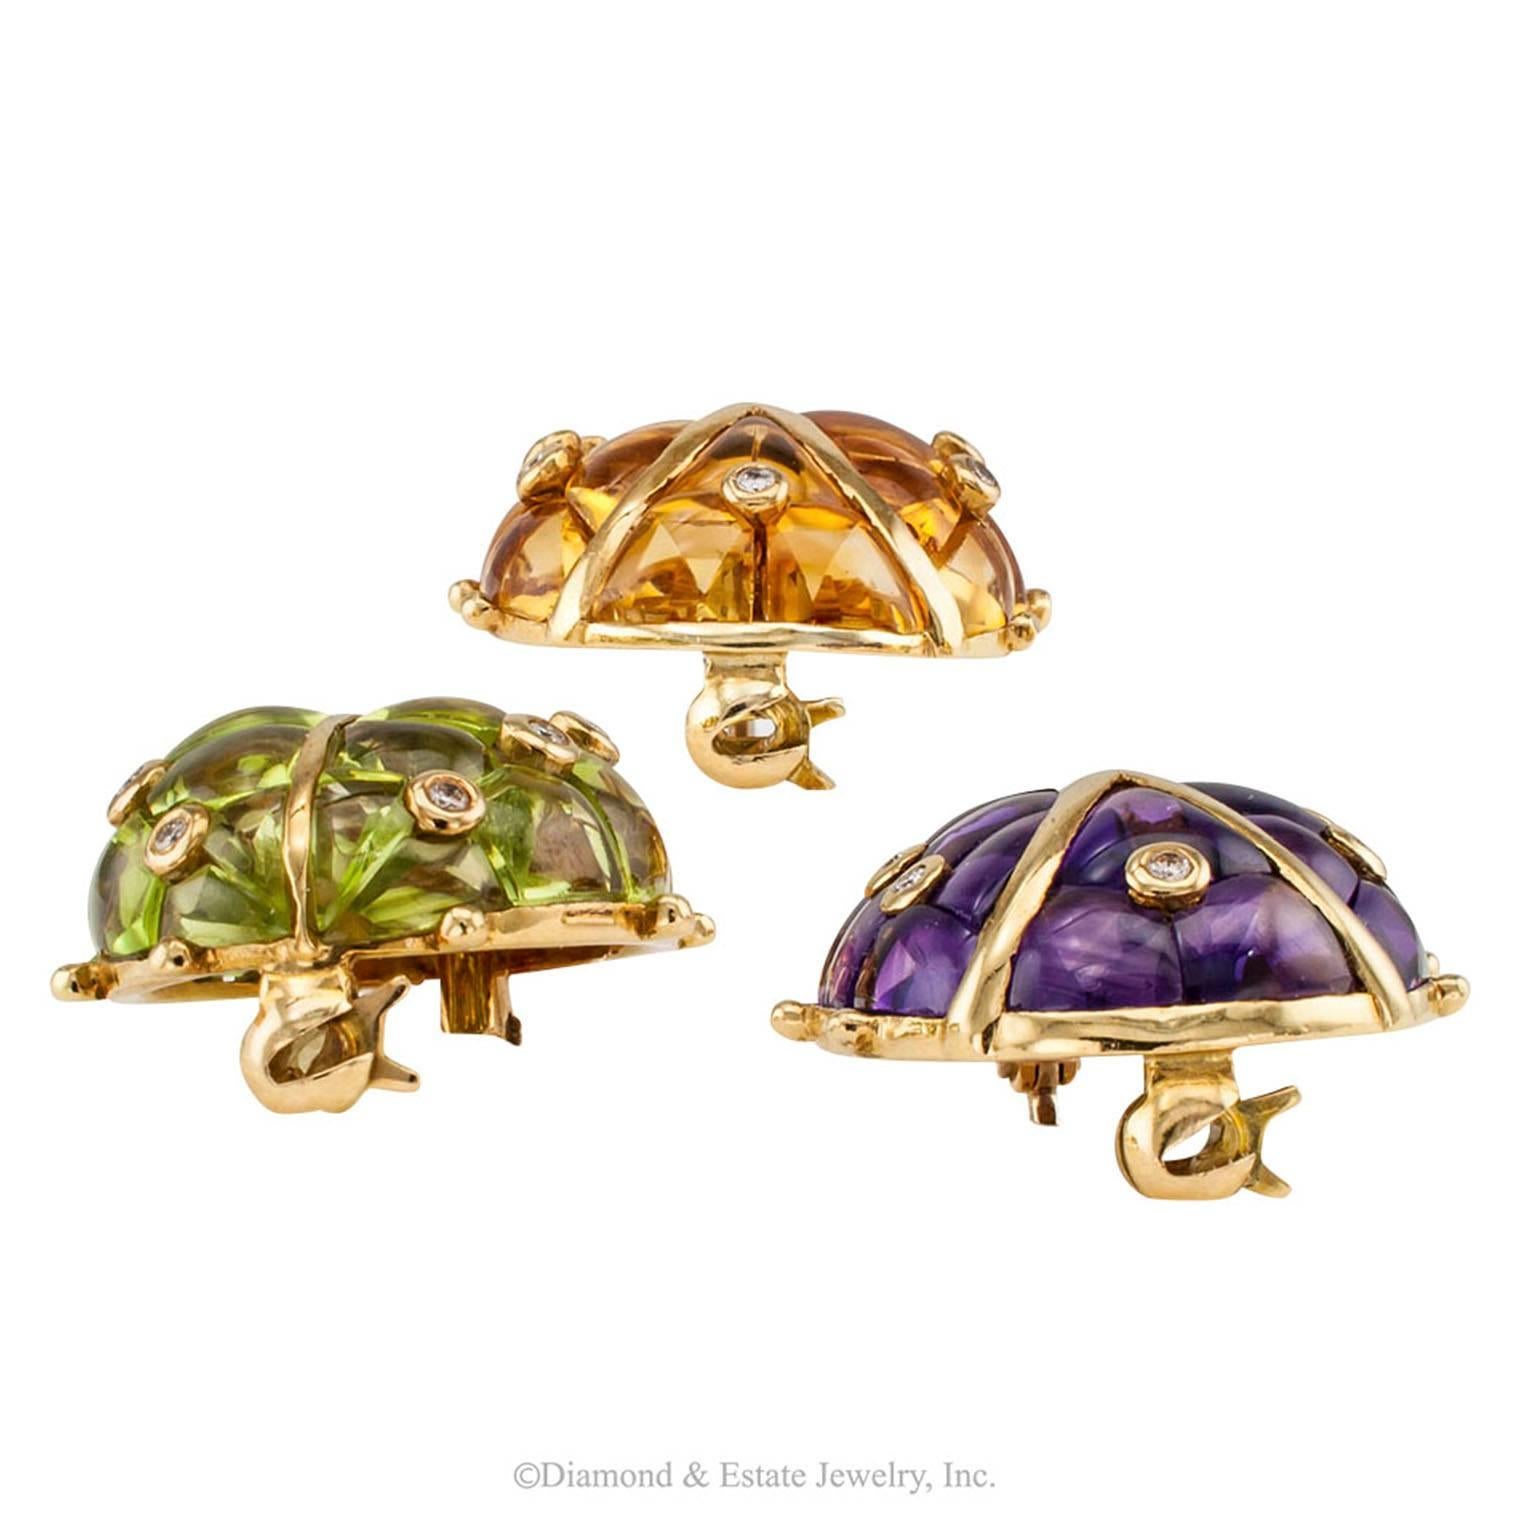 1970s Gem Set Ladybug Trio Gold Brooches 

1970s trio of gem-set ladybug brooches in 18-karat gold with amethyst citrine diamond peridot and ruby. These adorable ladybug brooches have wings set with vibrant color, precision-cut buff top amethyst,